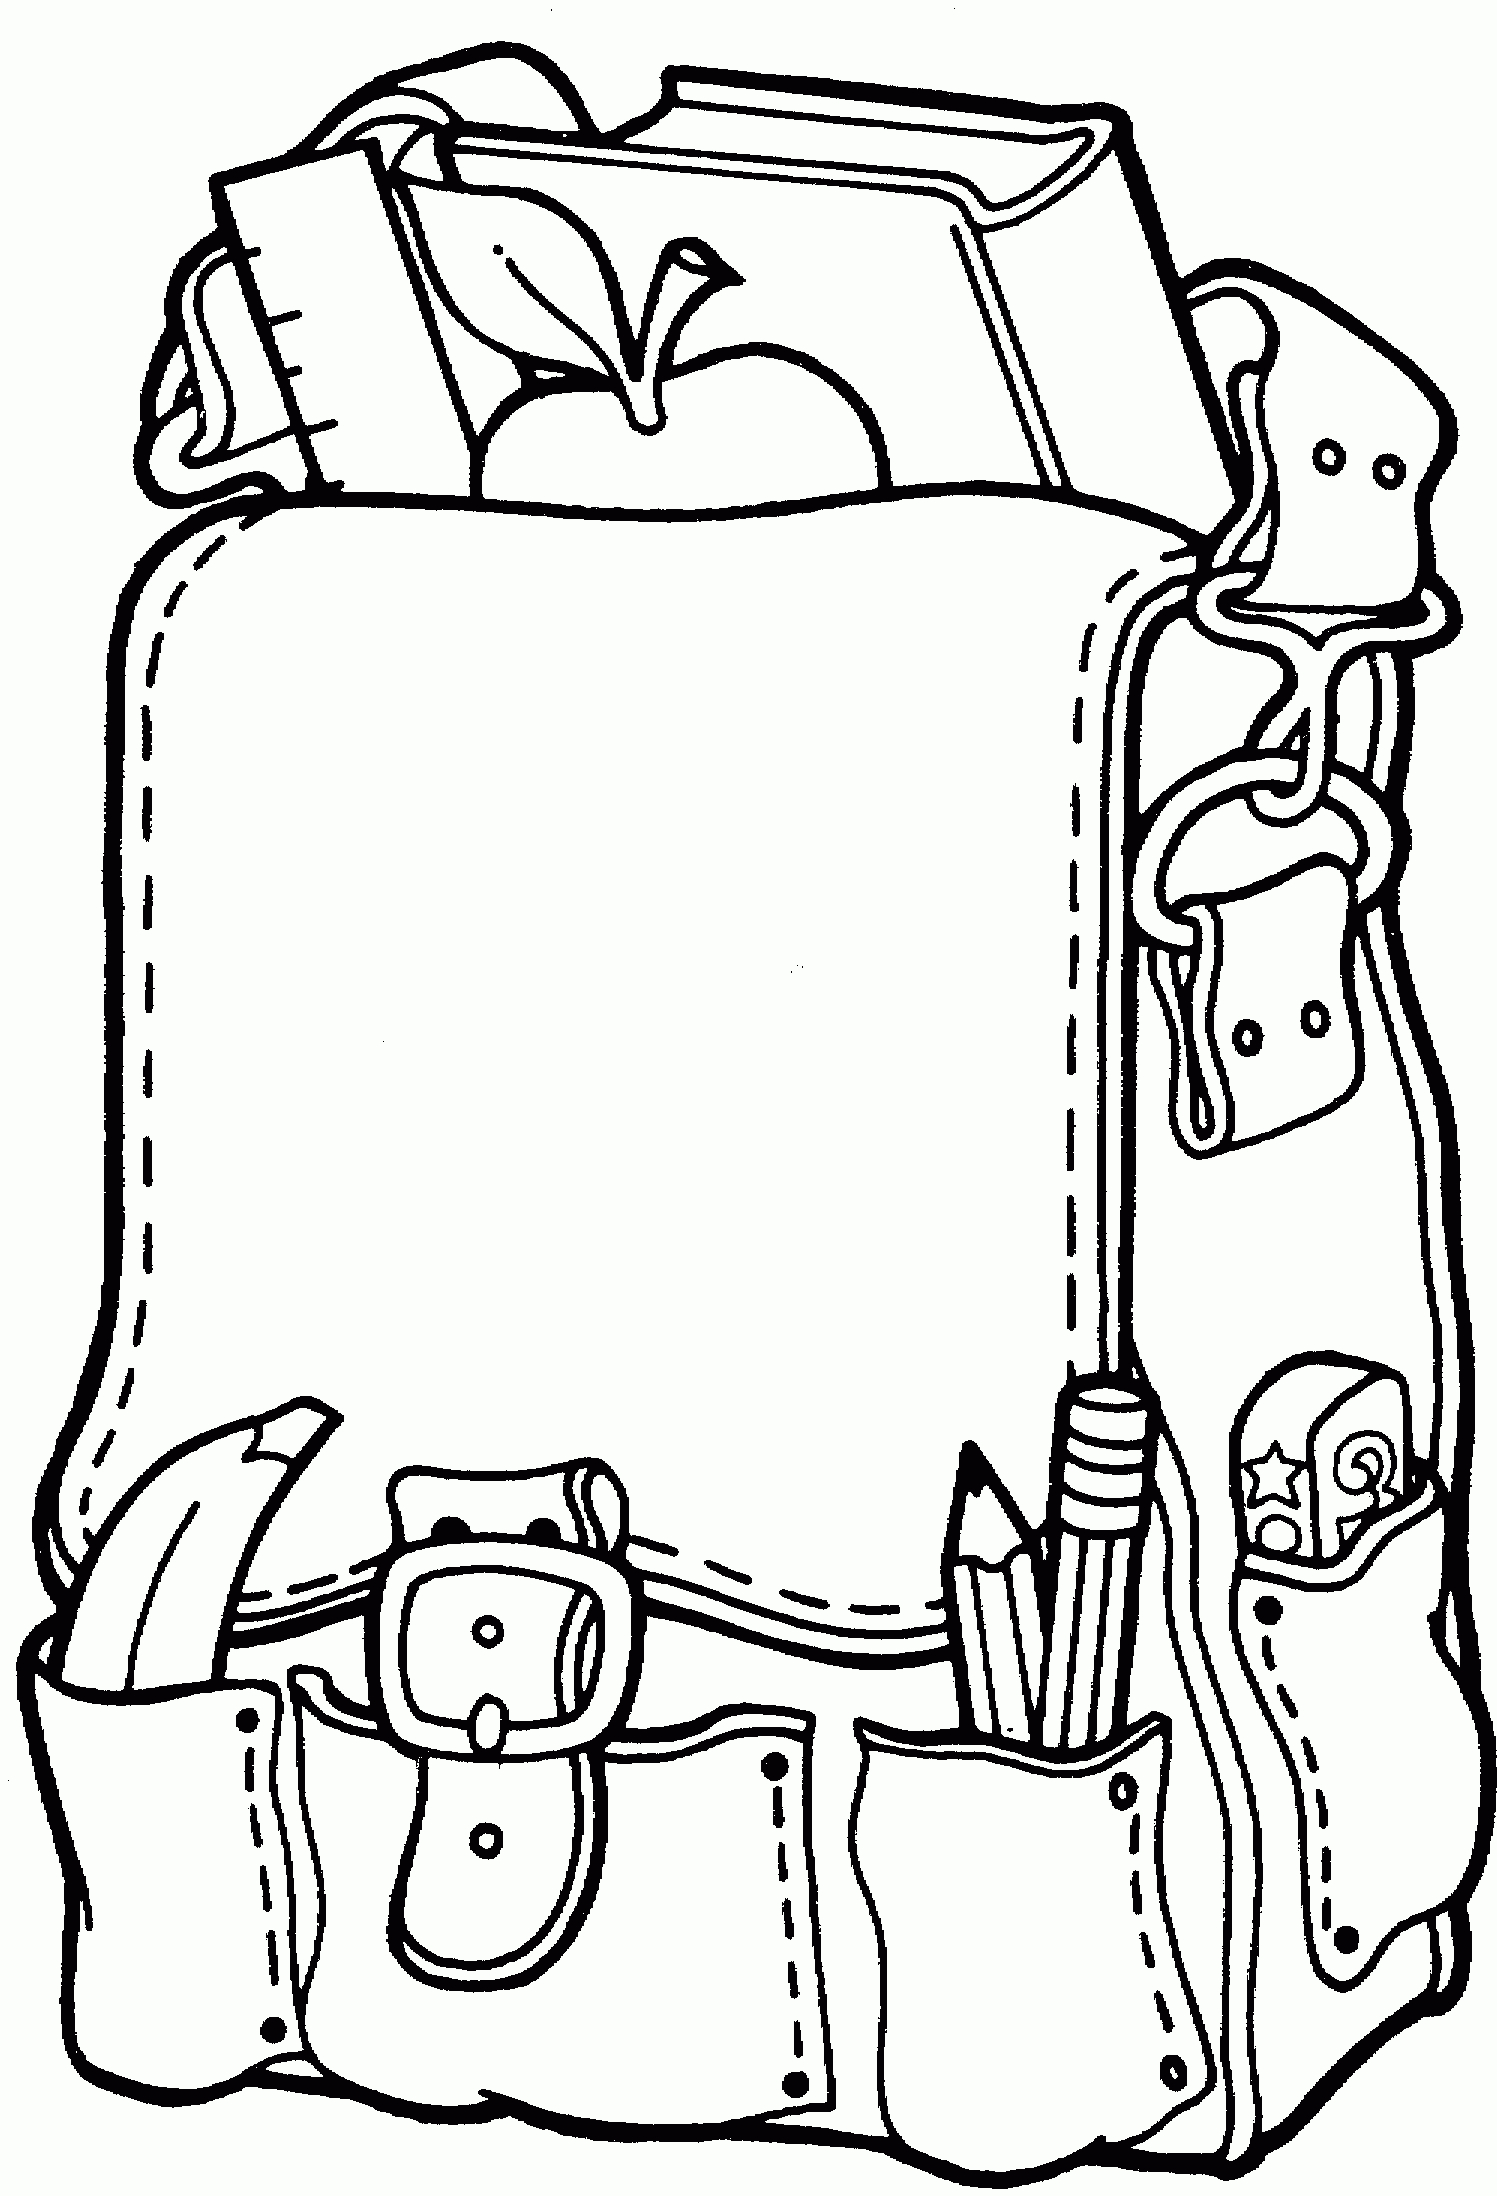 Free Printable Backpack Coloring Pages For Preschoolers | Clipart - Free Printable Coloring Pages For Preschoolers